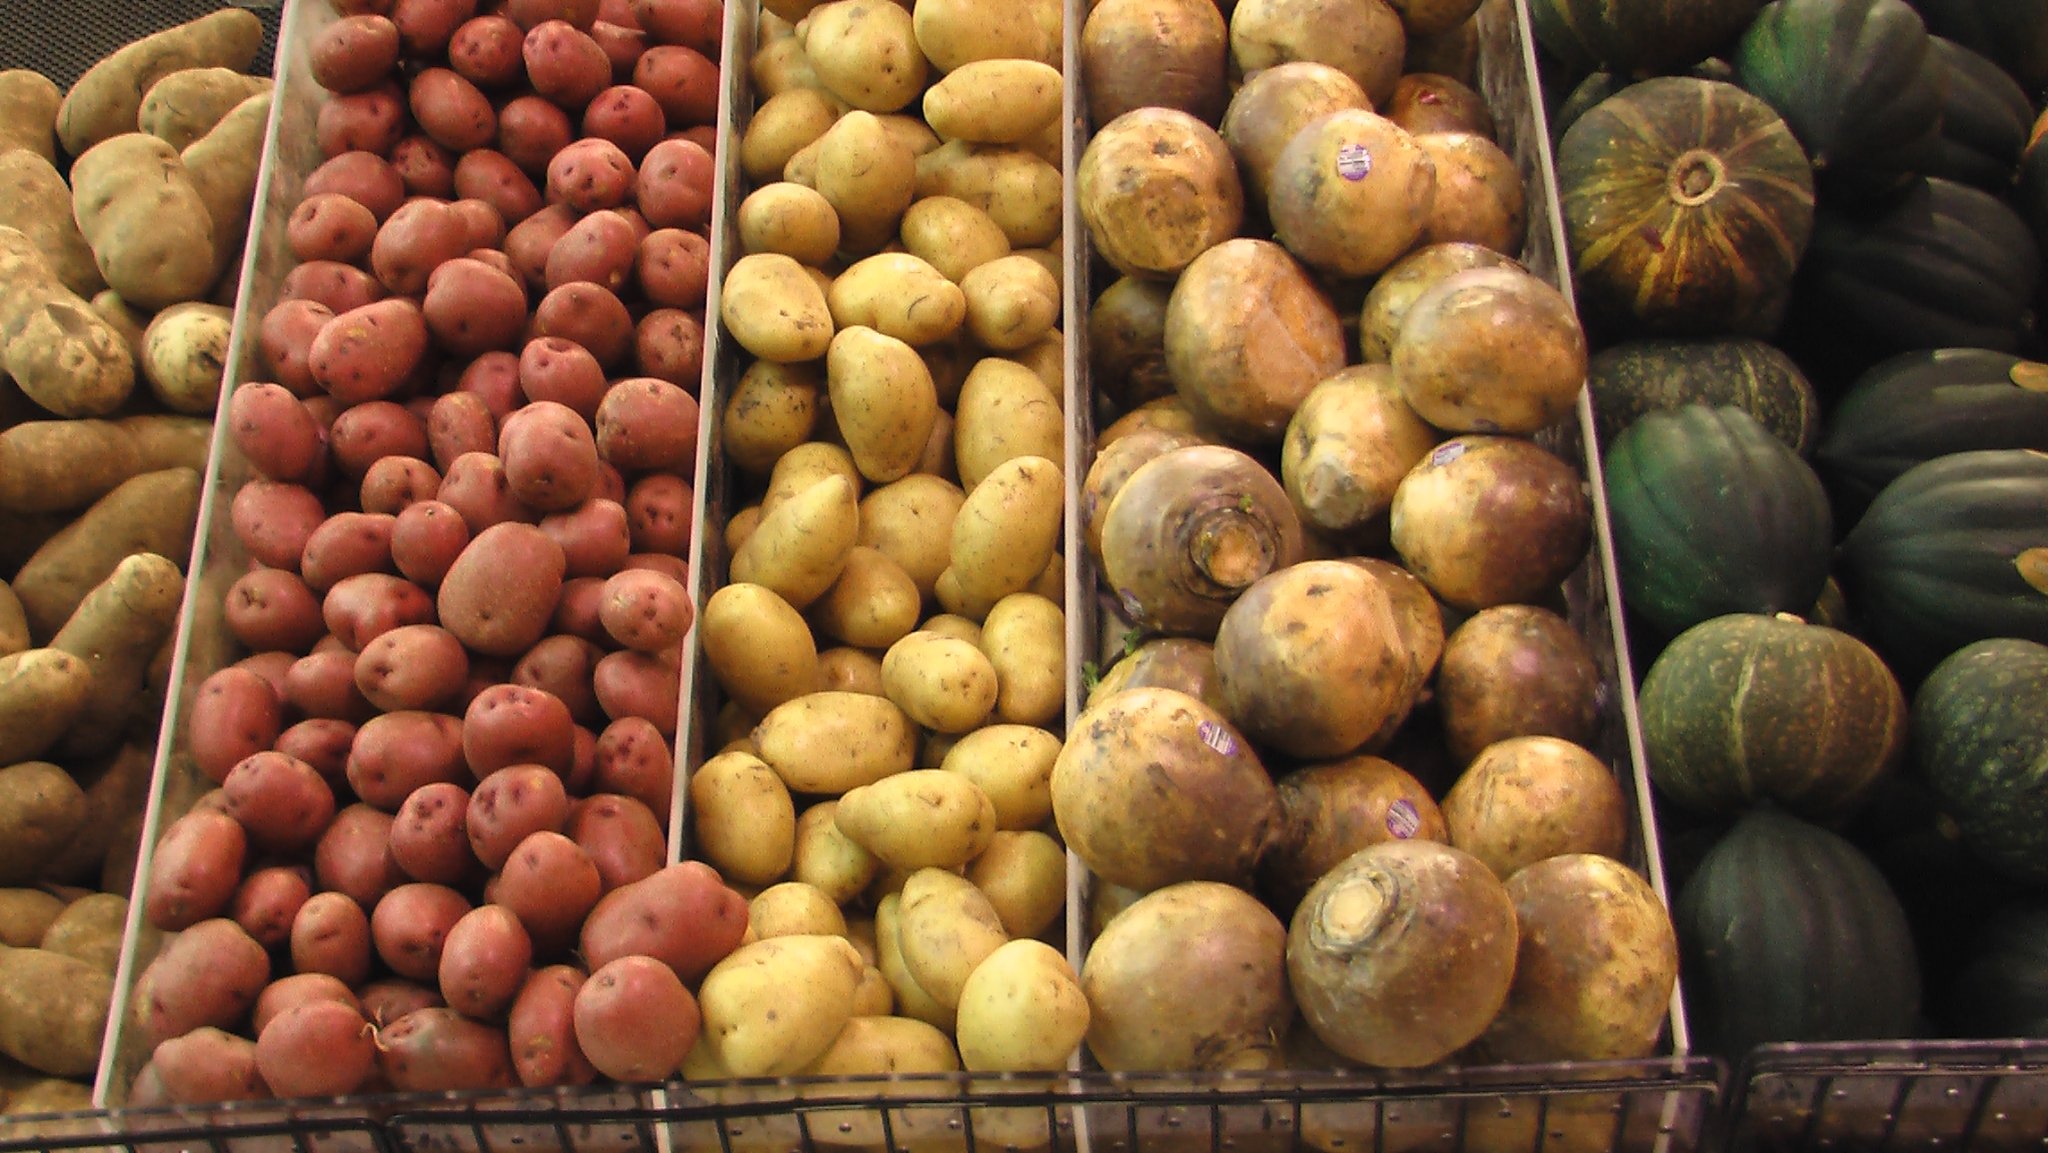 There's a Fascinating Story of the CIA's Kodachrome Slides of Potatoes